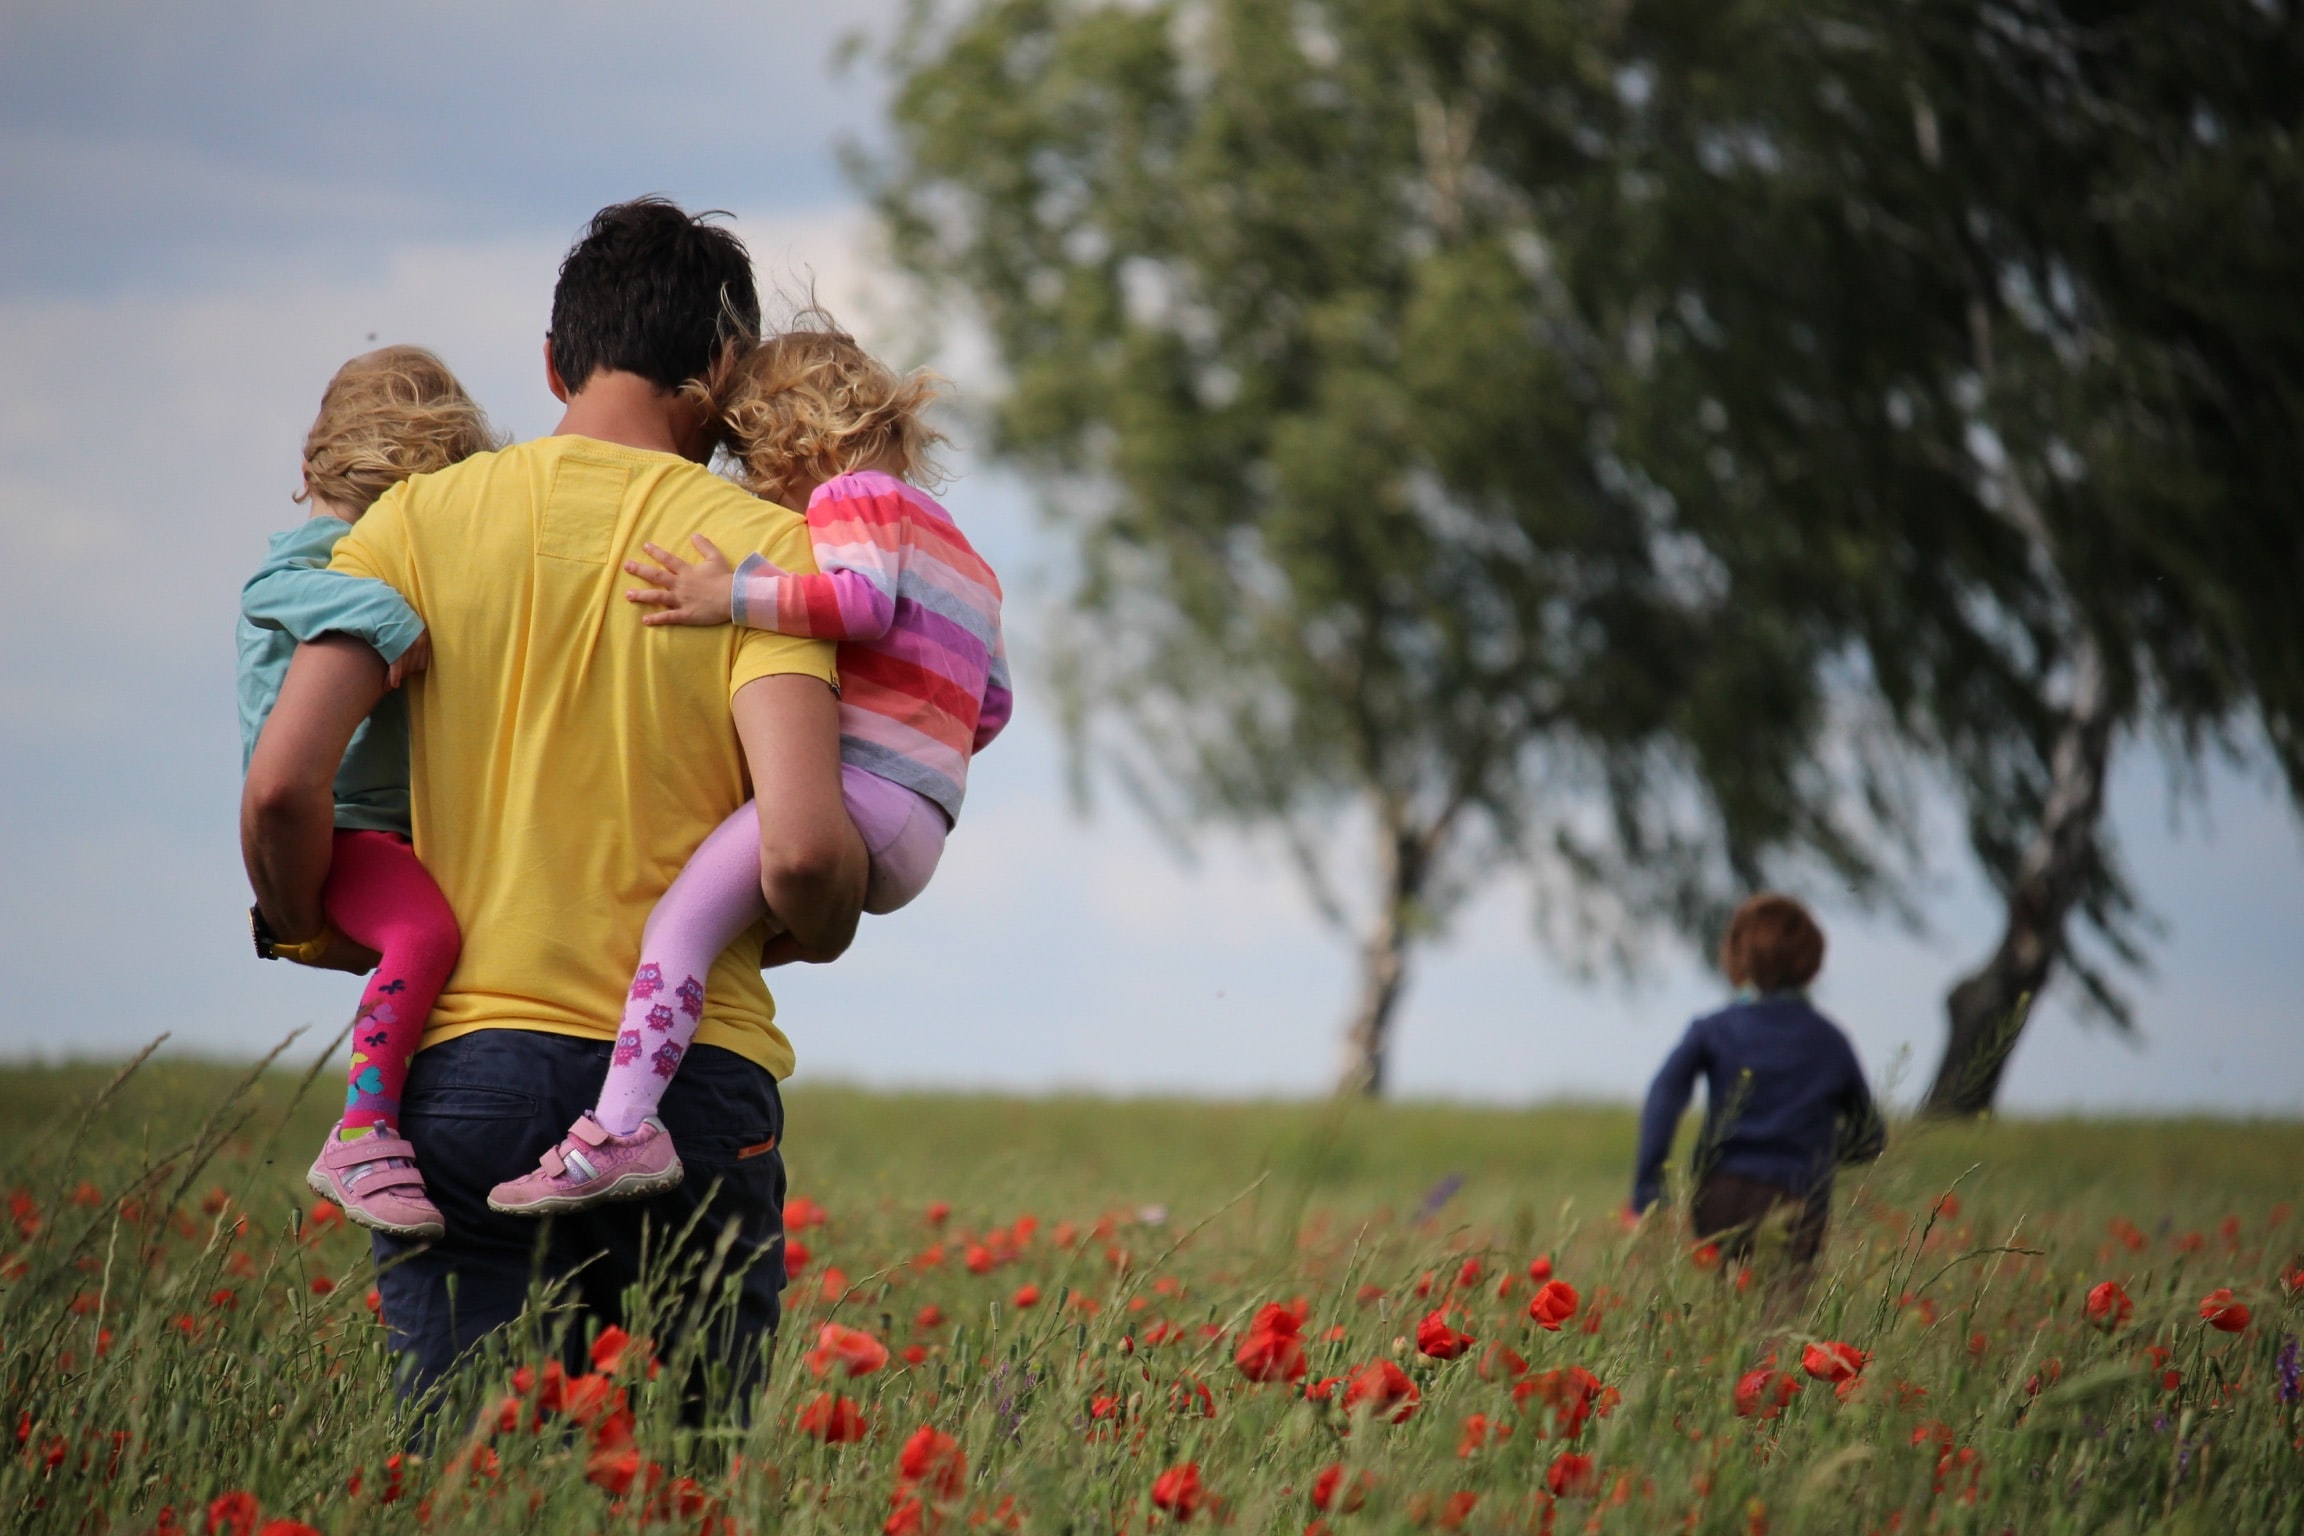 benefits of having life insurance. Man in a field holding 3 children